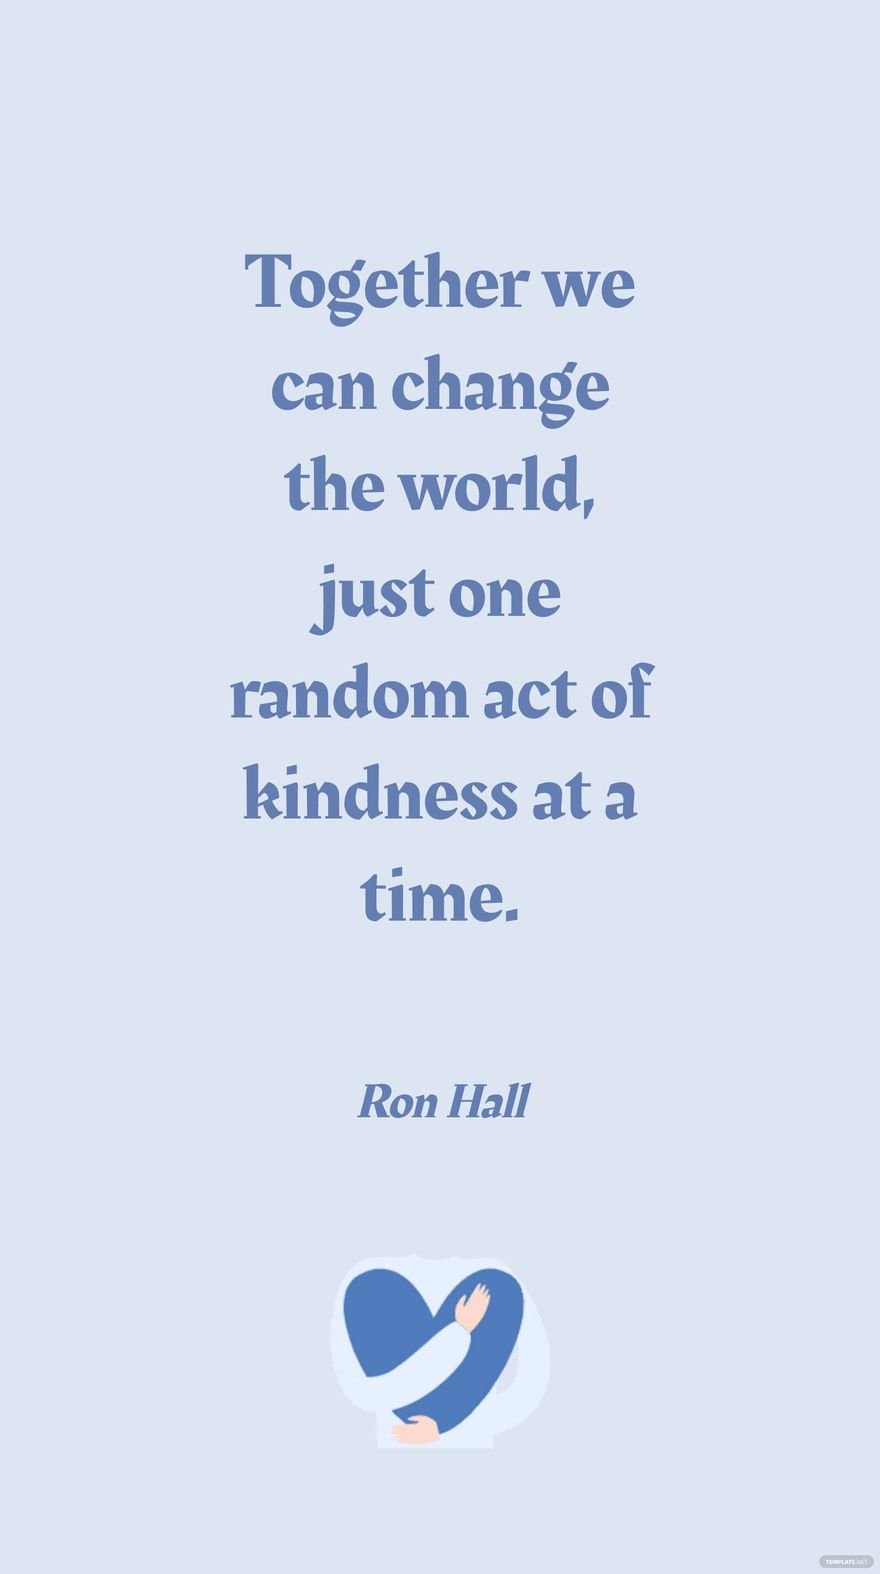 Free Ron Hall - Together we can change the world, just one random act of kindness at a time. in JPG